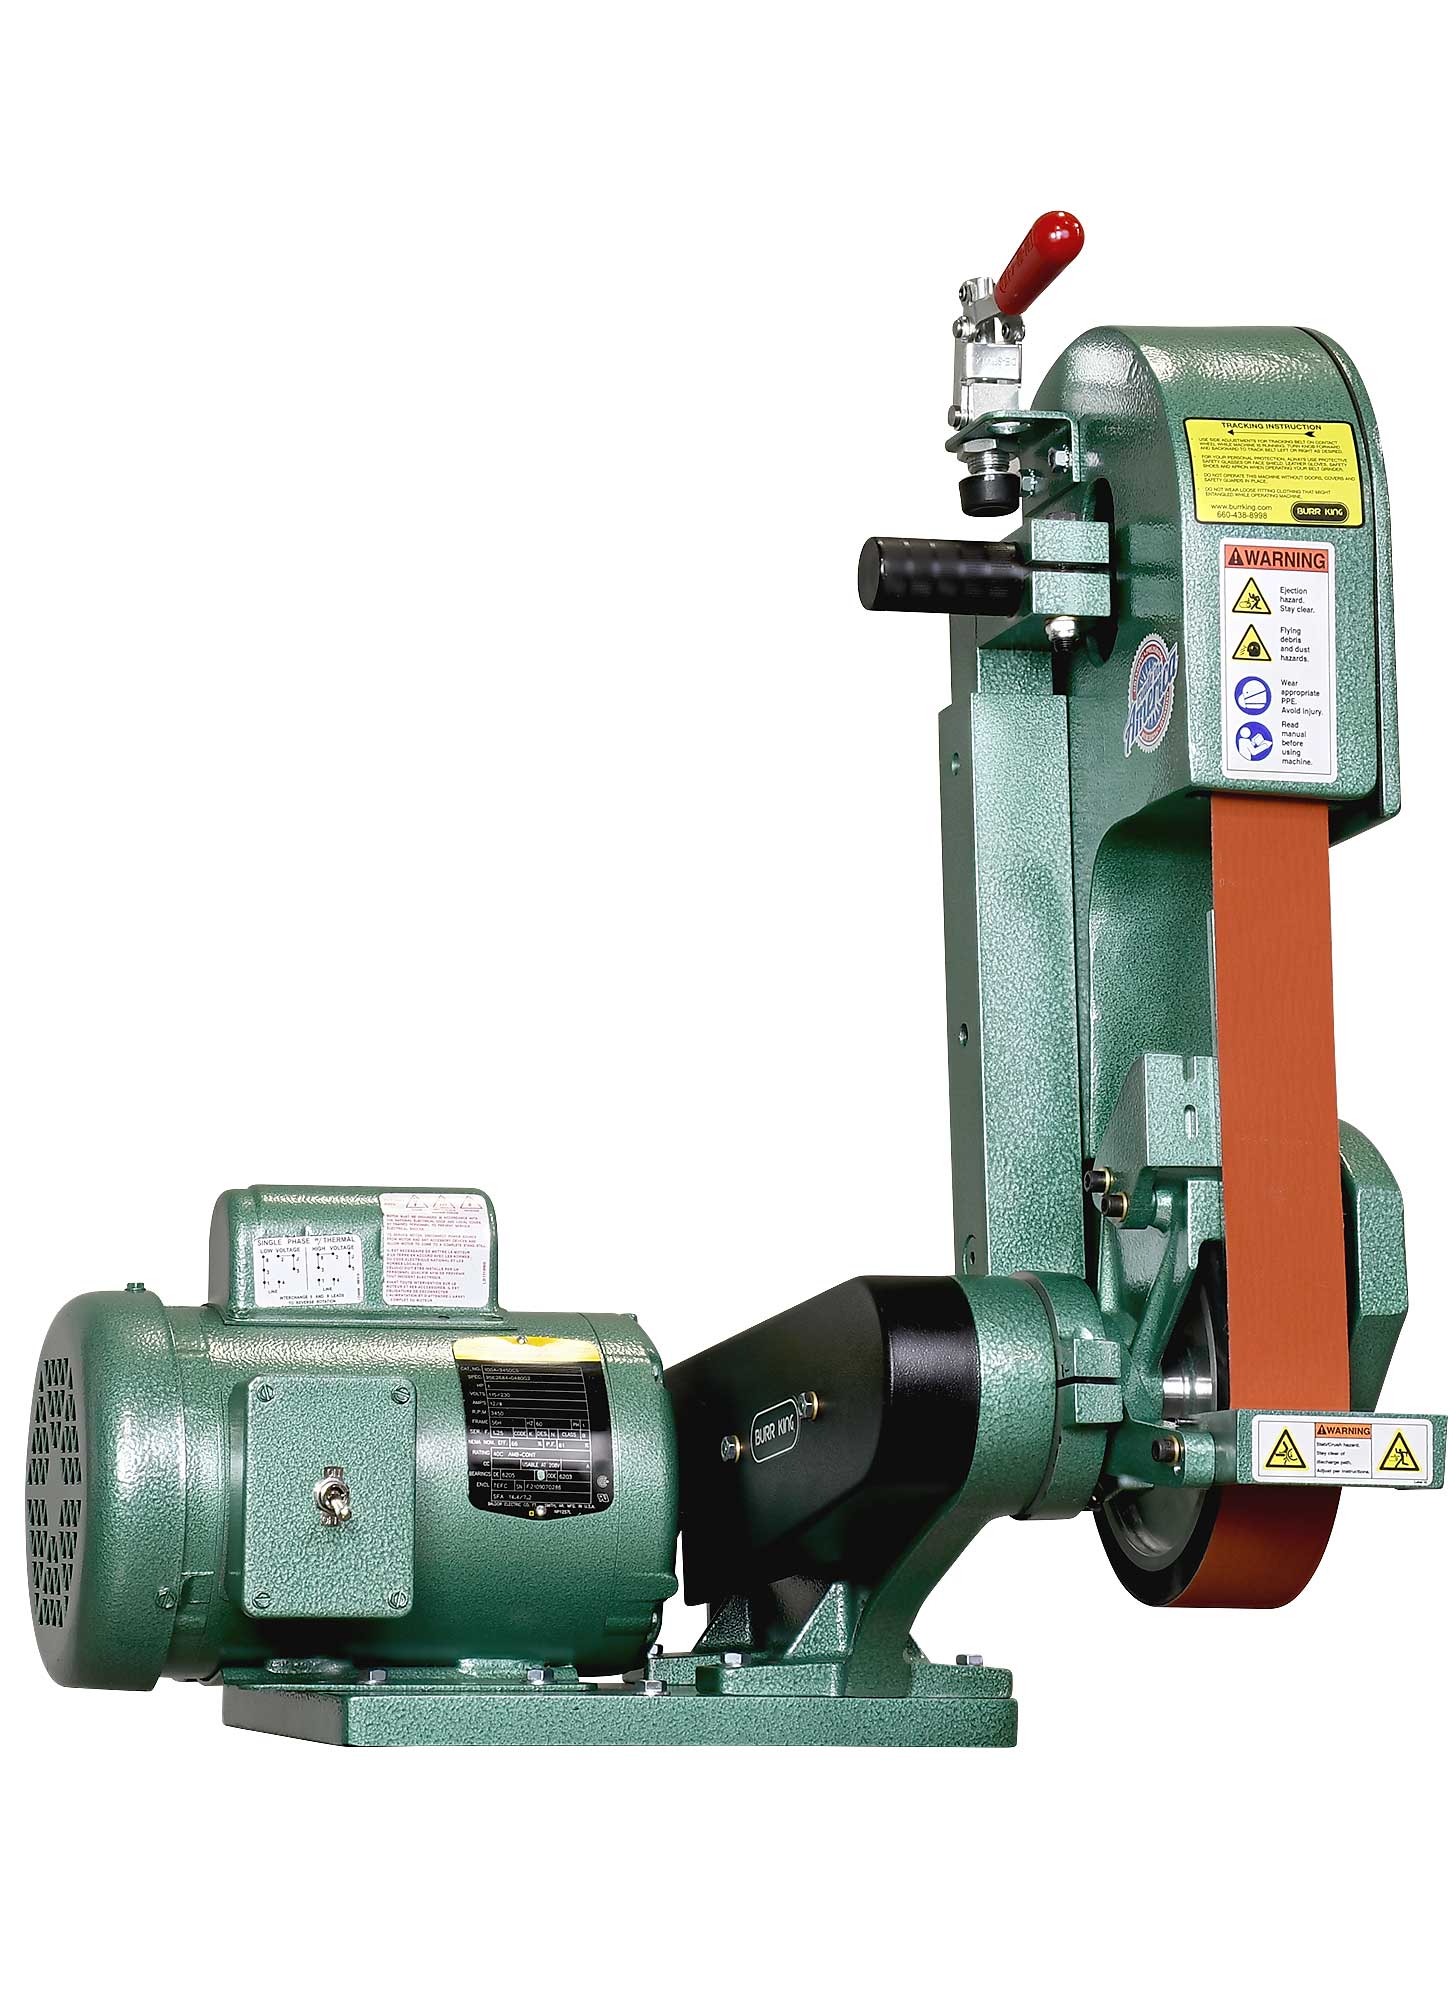 24820 fixed speed X400 Belt Grinder comes with an adjustable workrest.